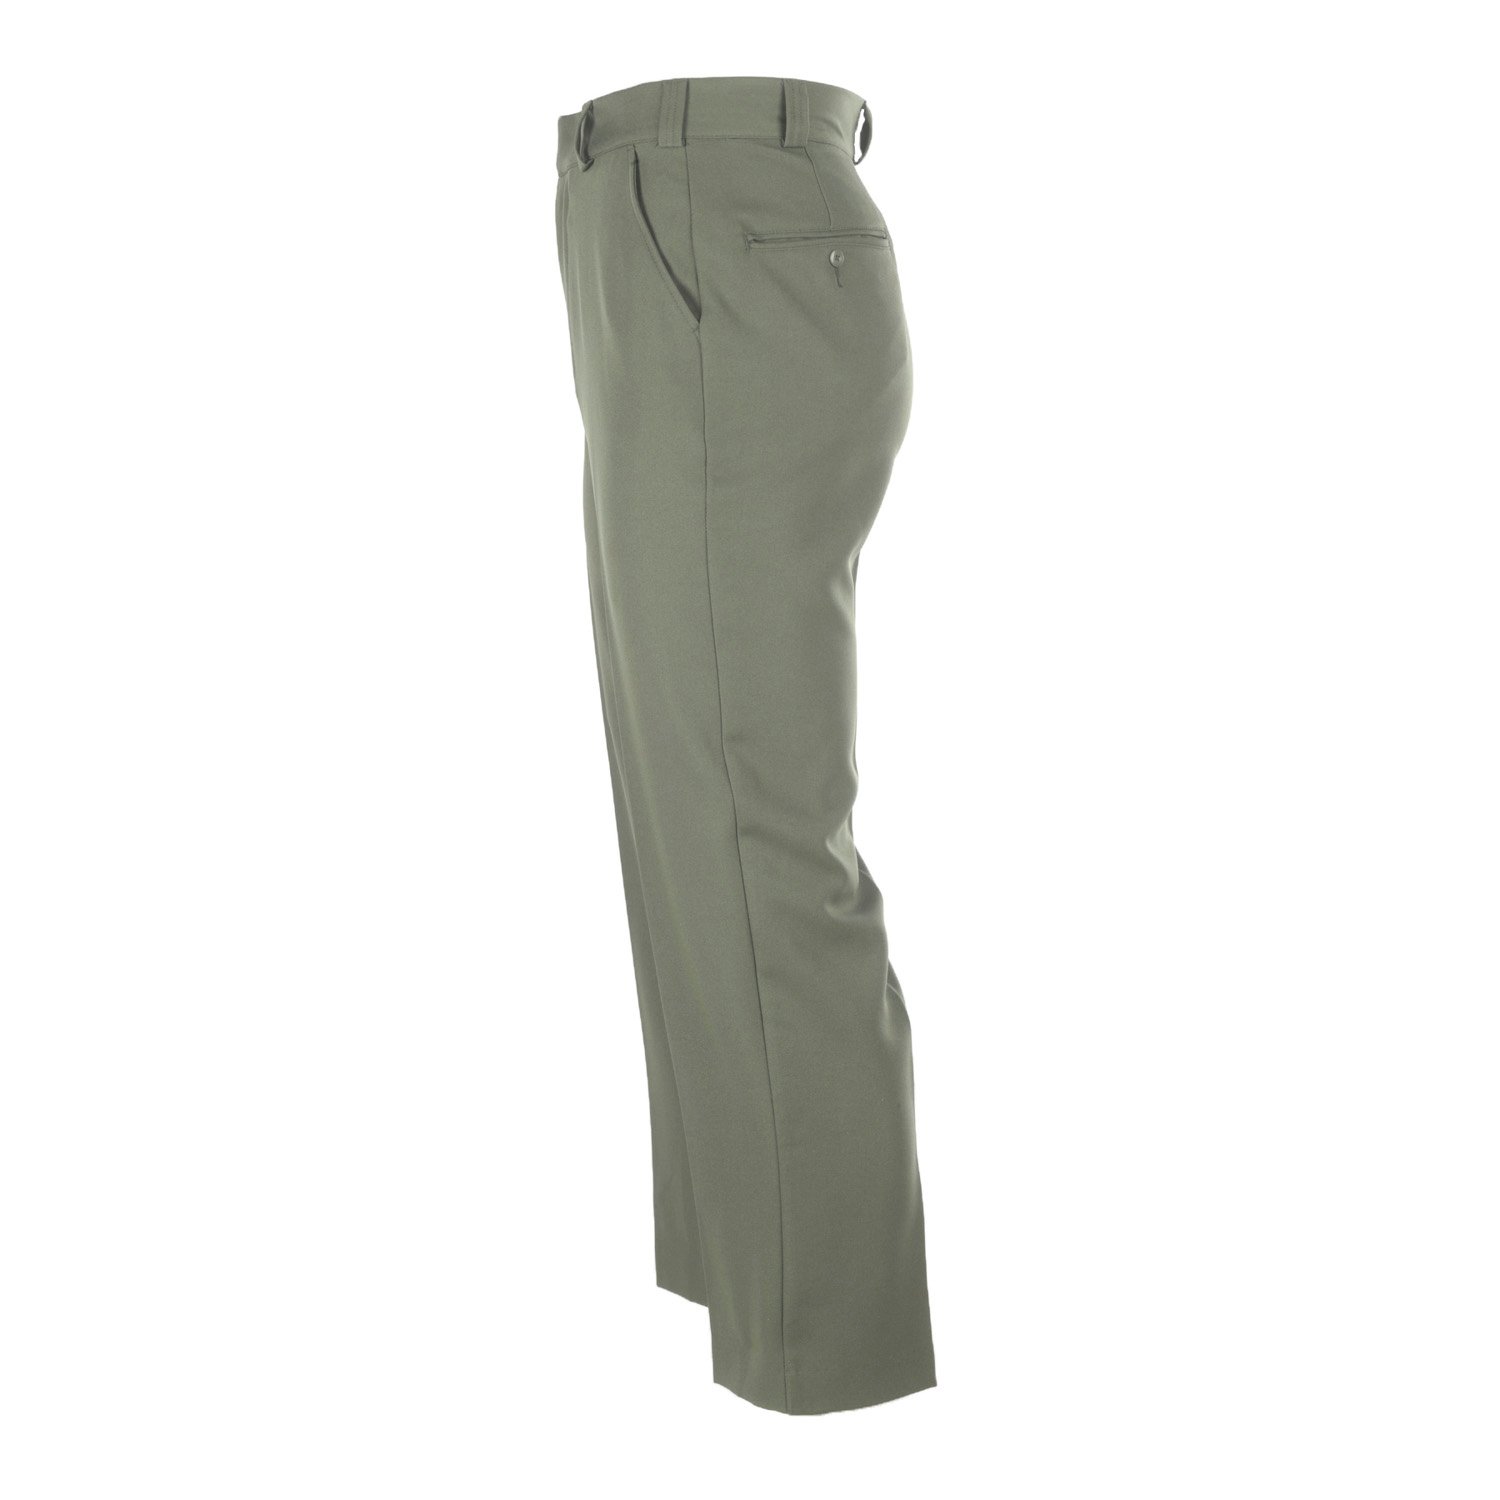 LAWPRO POLYESTER TWILL UNIFORM TROUSERS